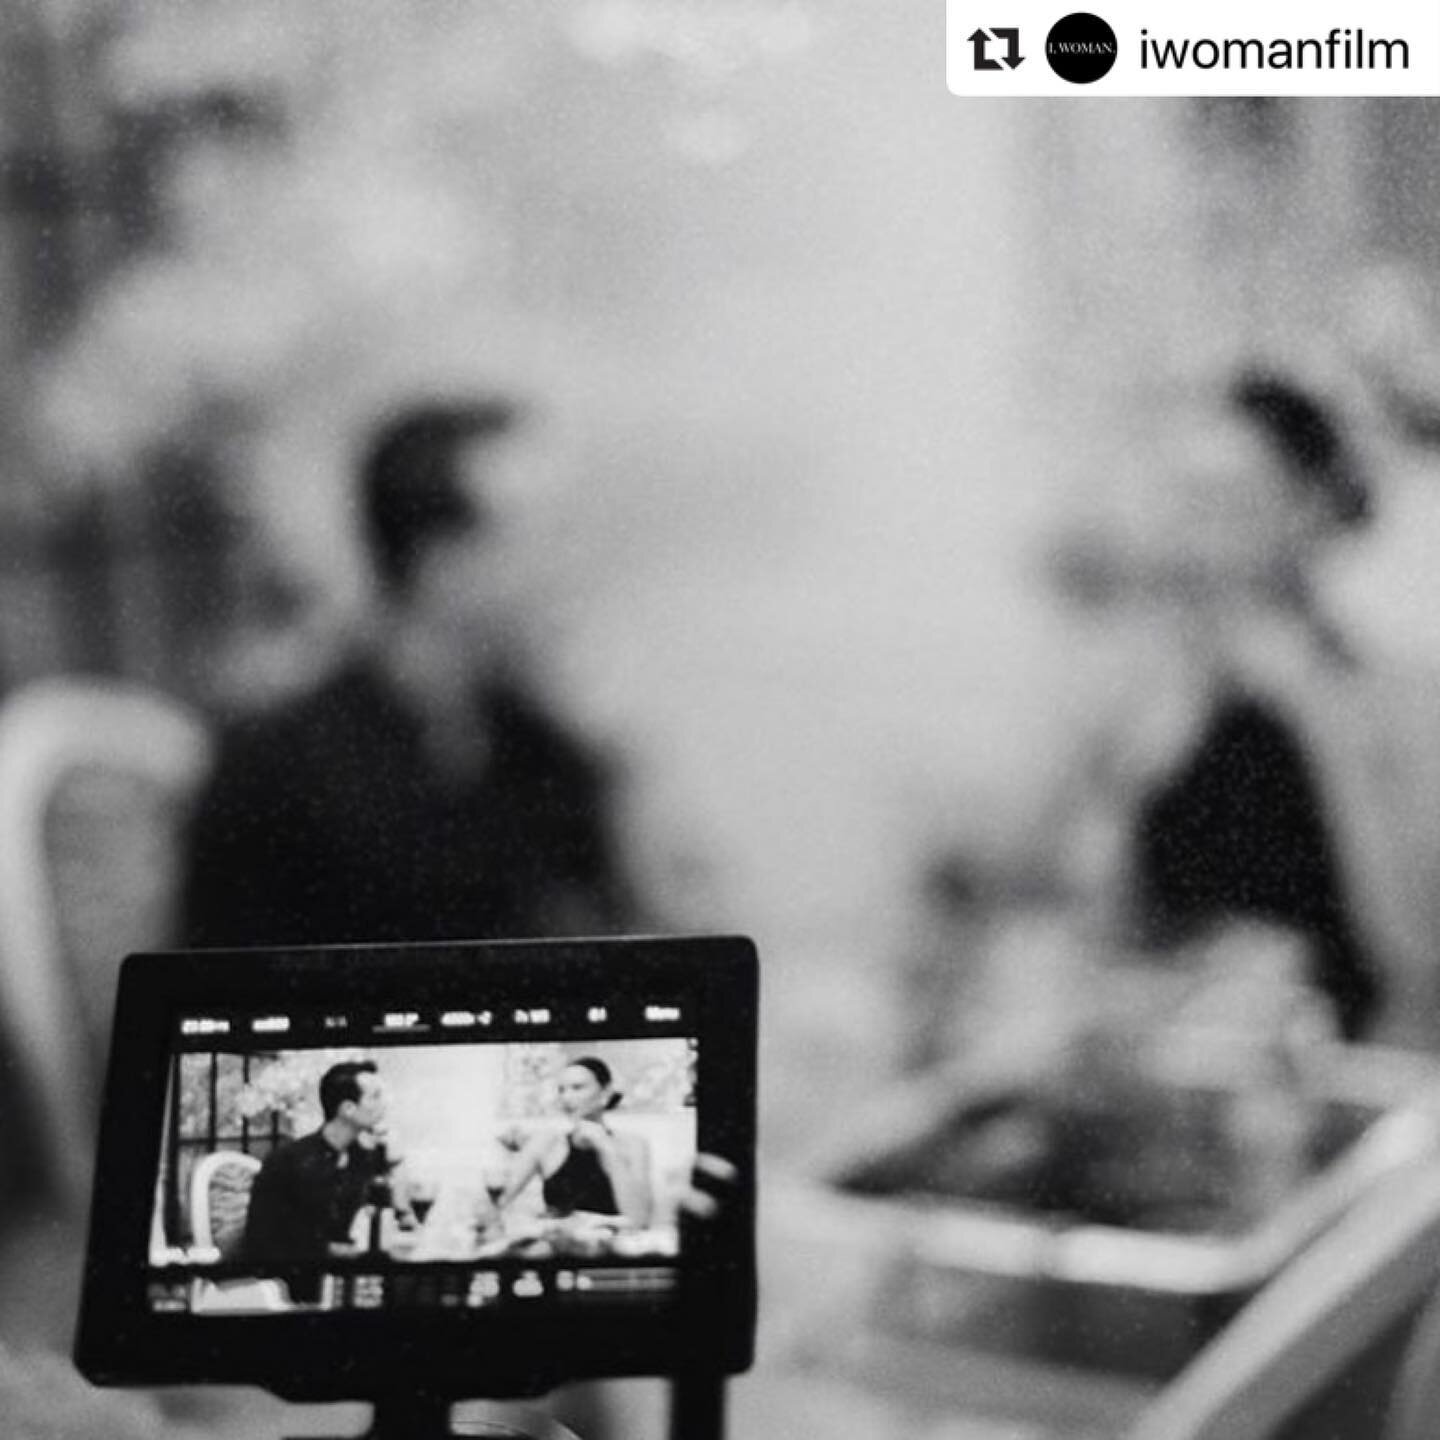 #Repost @iwomanfilm with @make_repost
・・・
The best team of &lsquo;I, WOMAN.&rsquo; is working around the clock during these difficult times that we&rsquo;ve all been faced with. We hope everyone is staying safe, wearing a mask and staying tuned for t